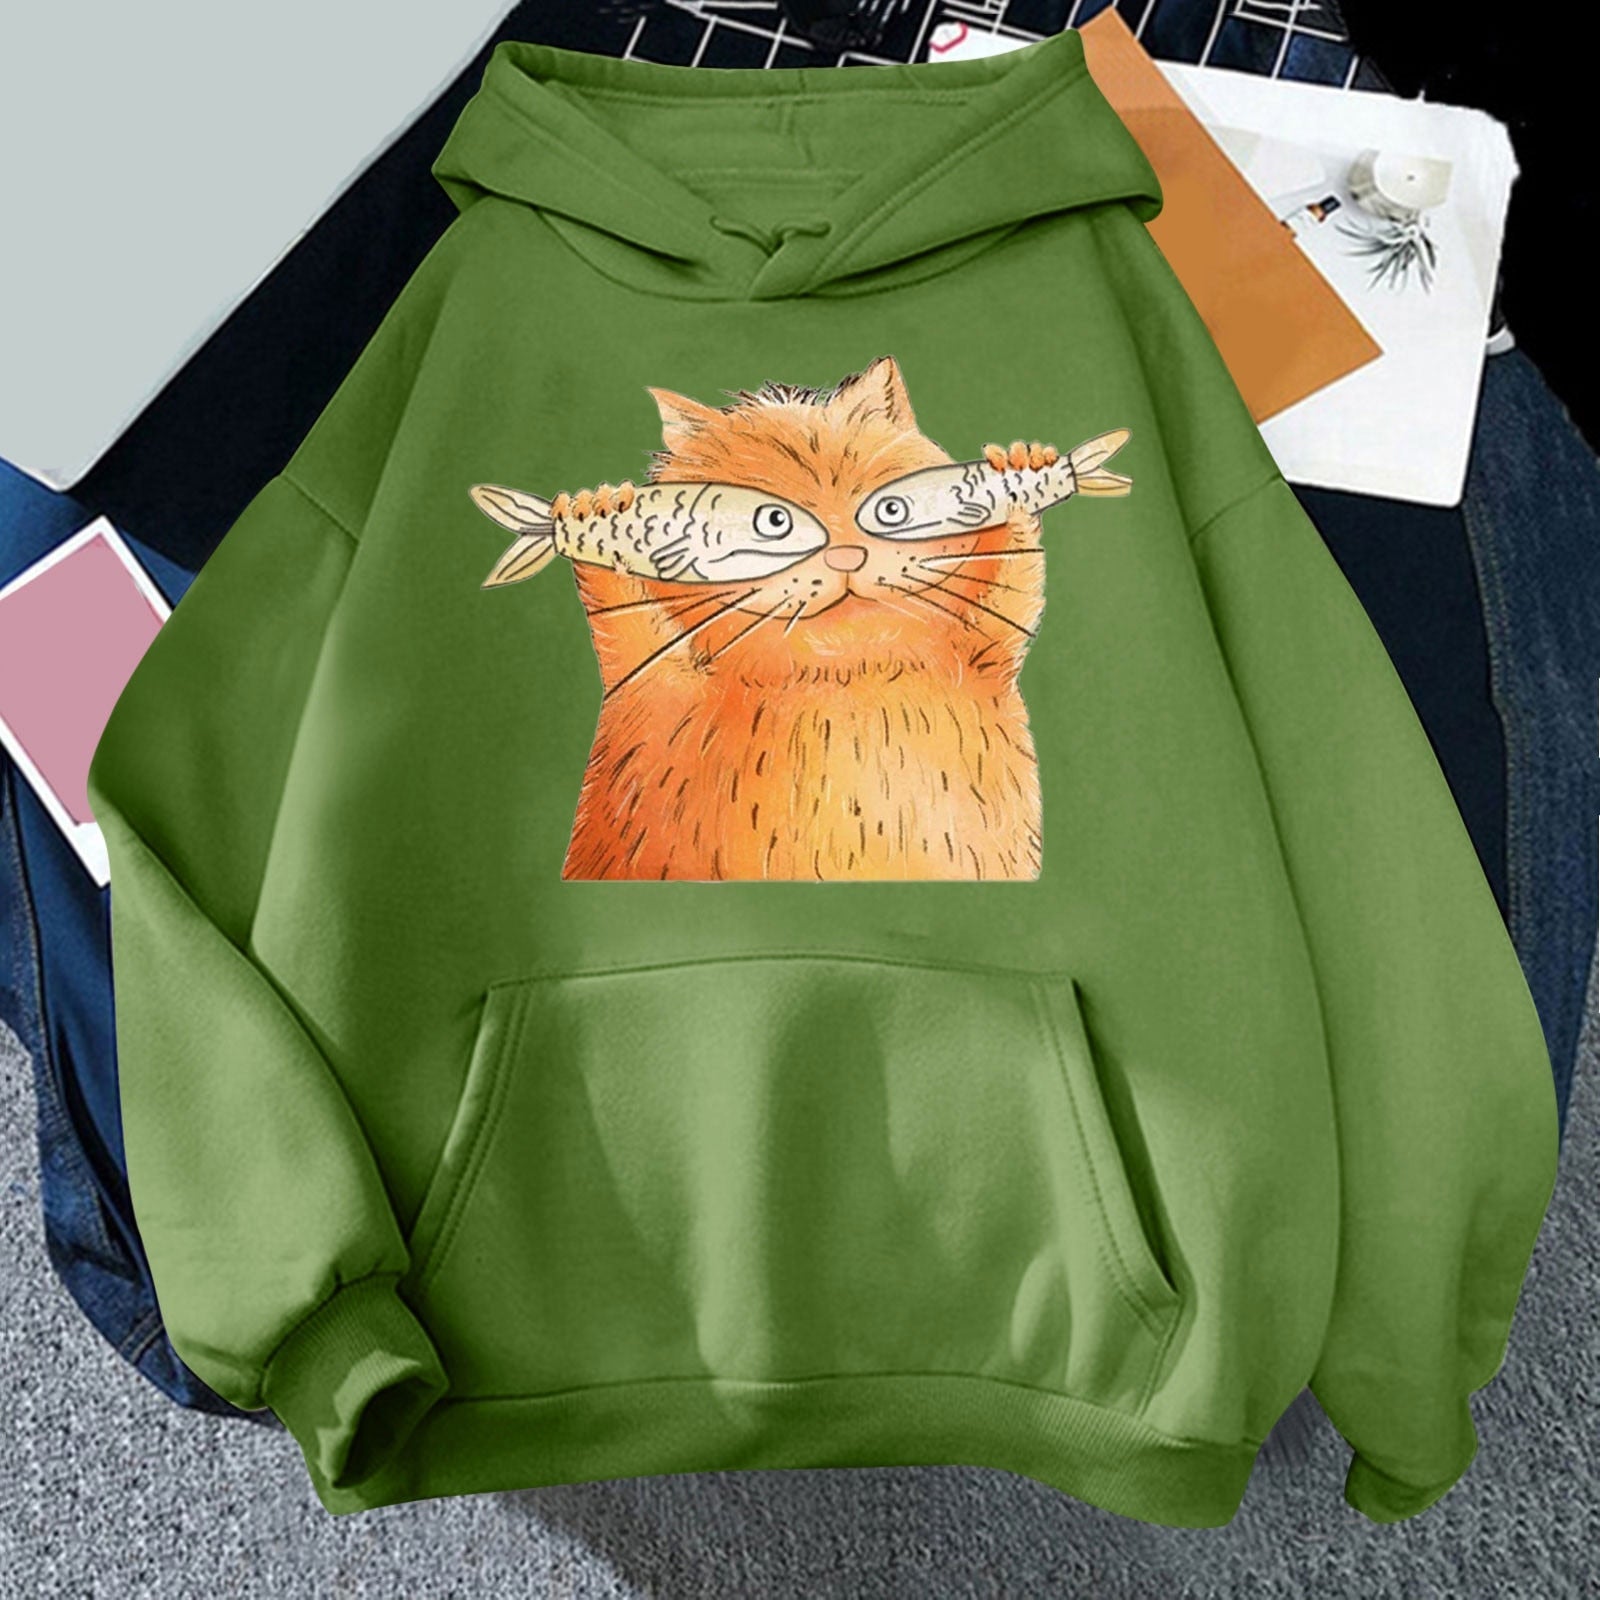 green color hoodie for women printed with a ginger cartoon cat holding two fishes and look really funny and hilarious